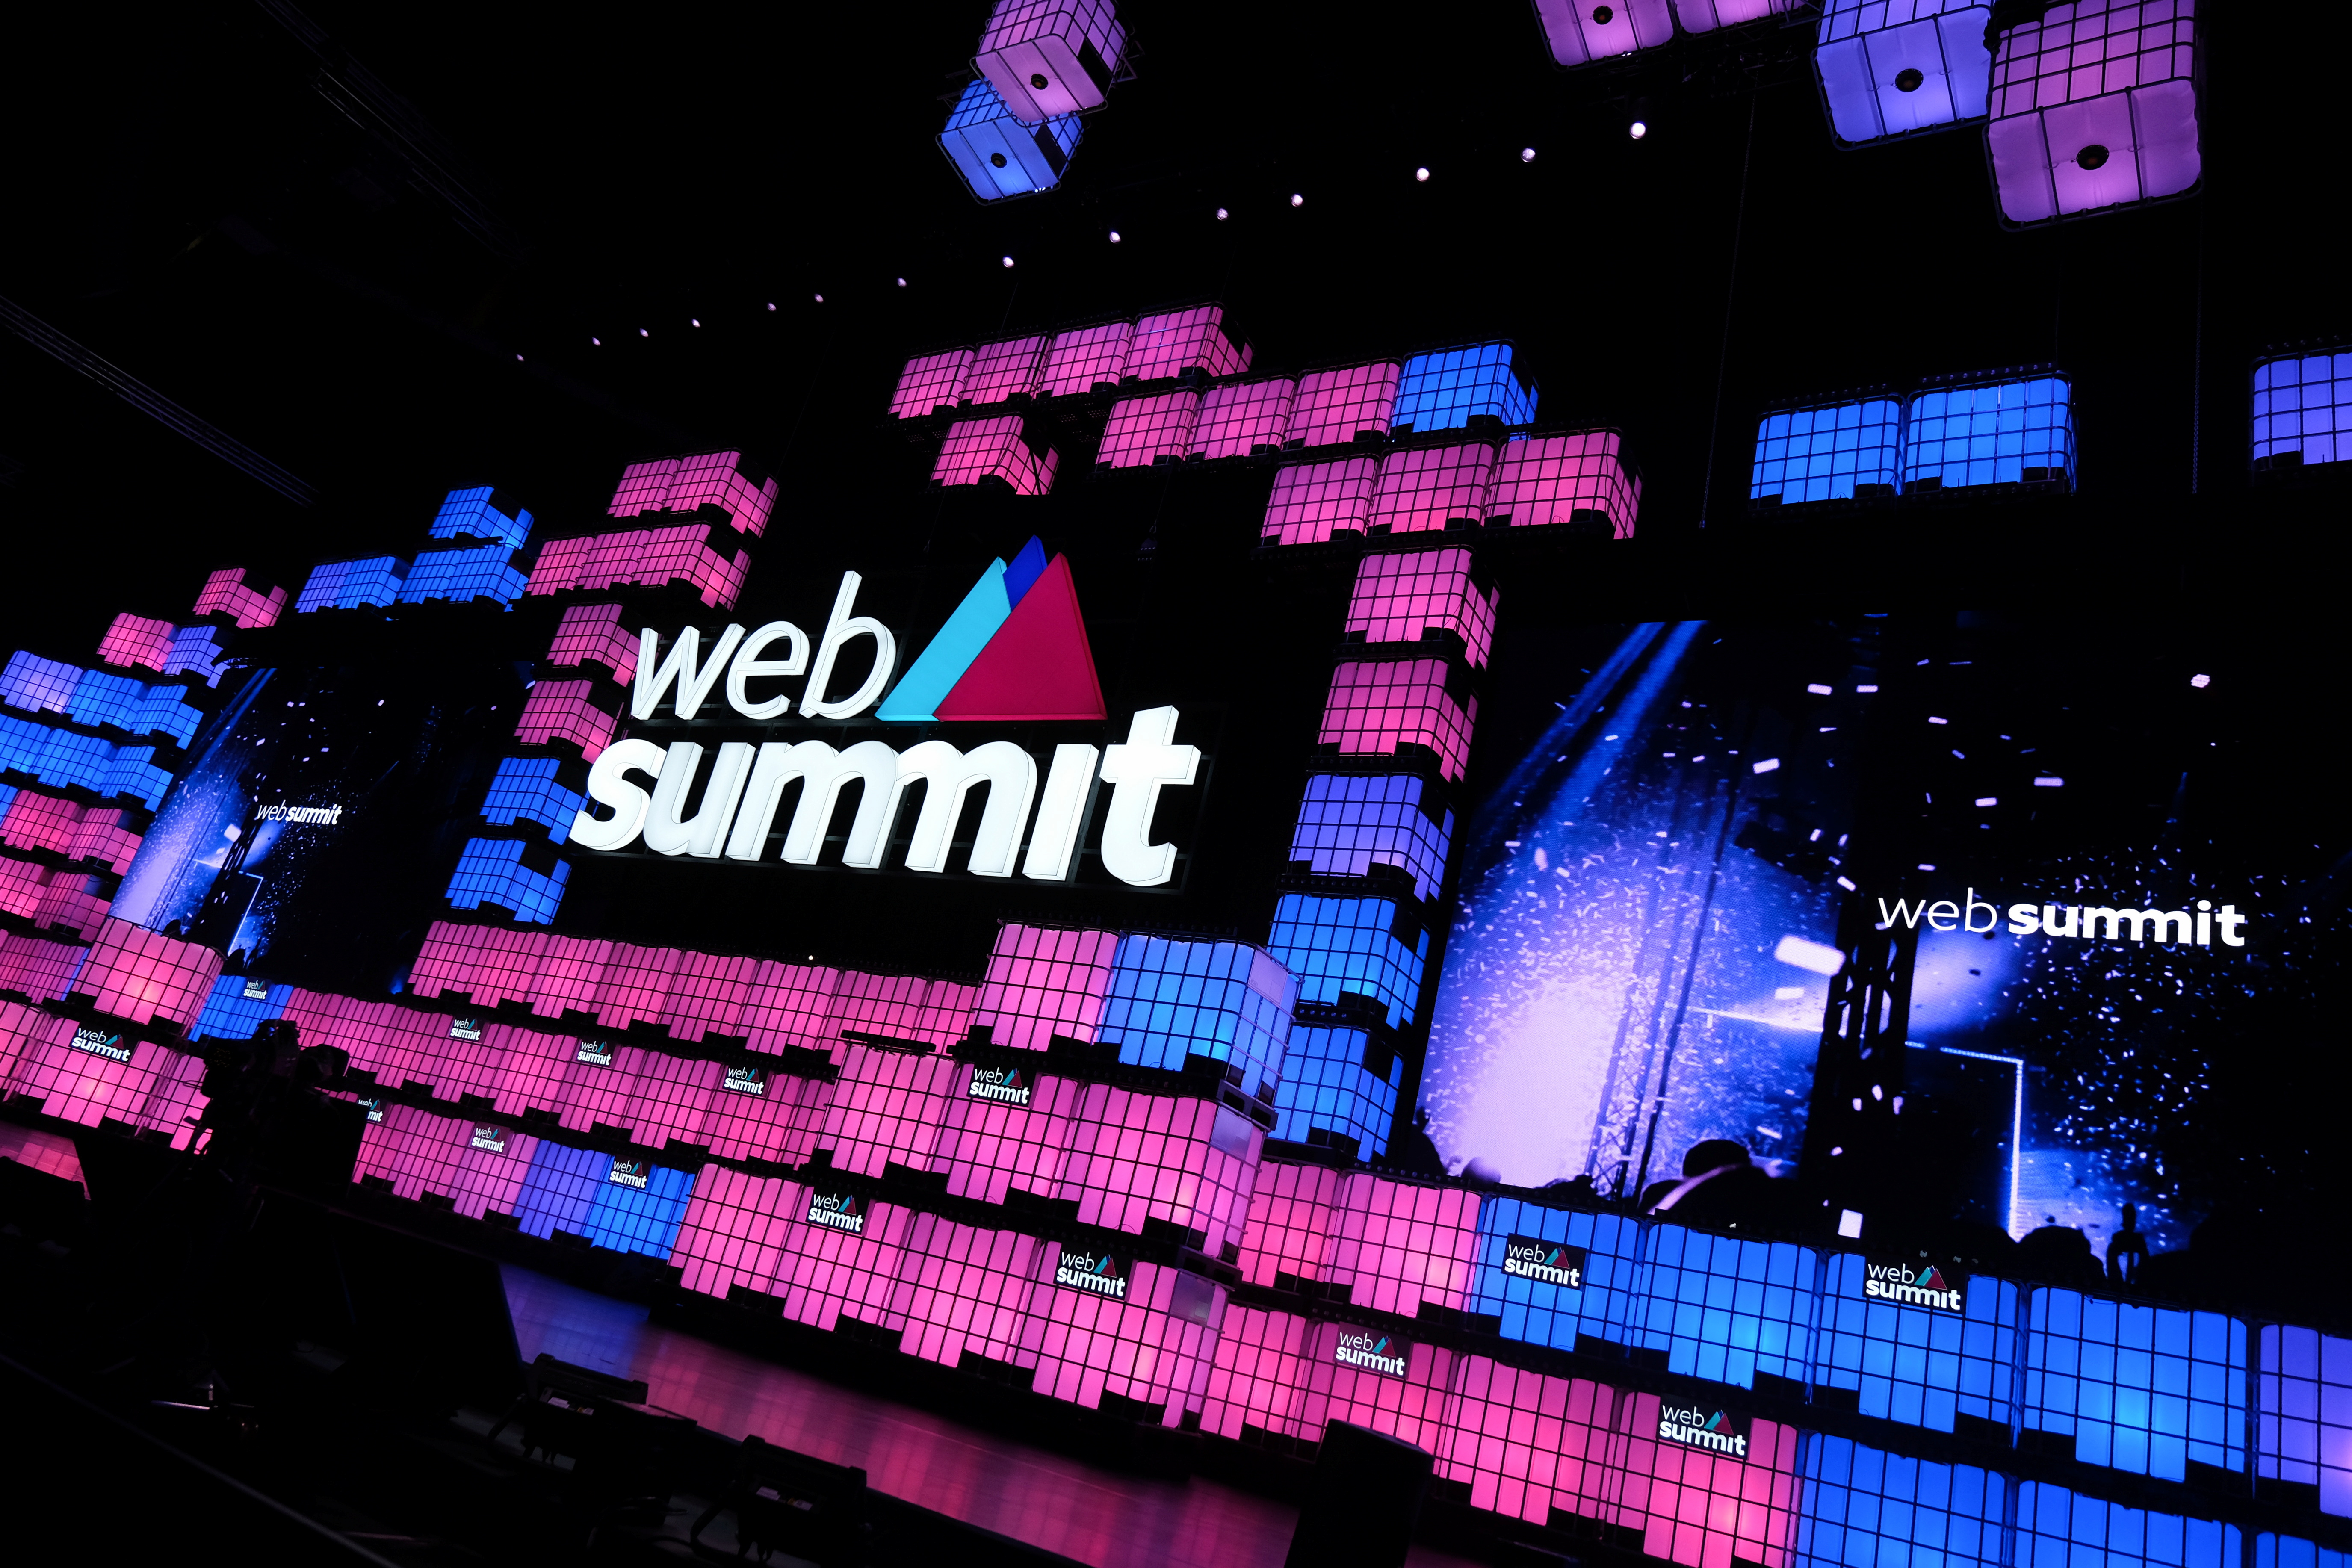 General view of the opening ceremony of Web Summit, Europe's largest technology conference, in Lisbon, Portugal, November 1, 2021. REUTERS/Pedro Nunes